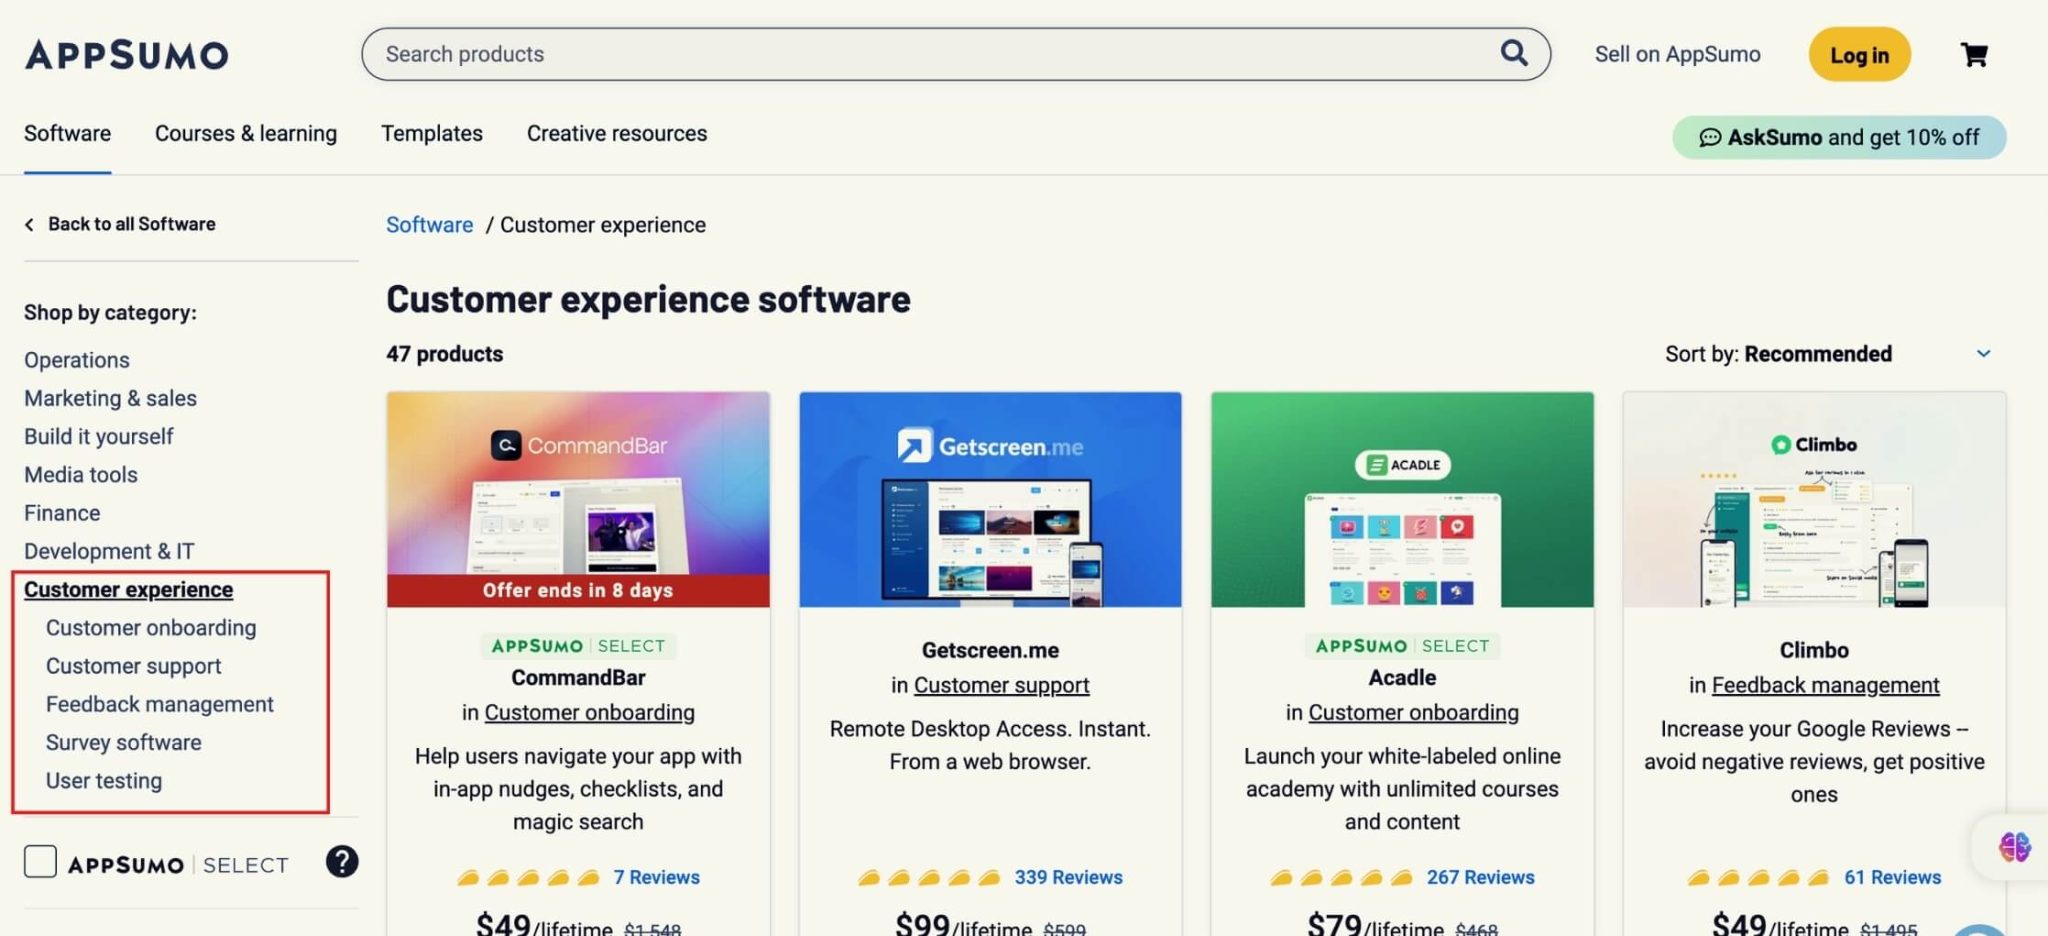 A screenshot of the appsumo website, costumer experience